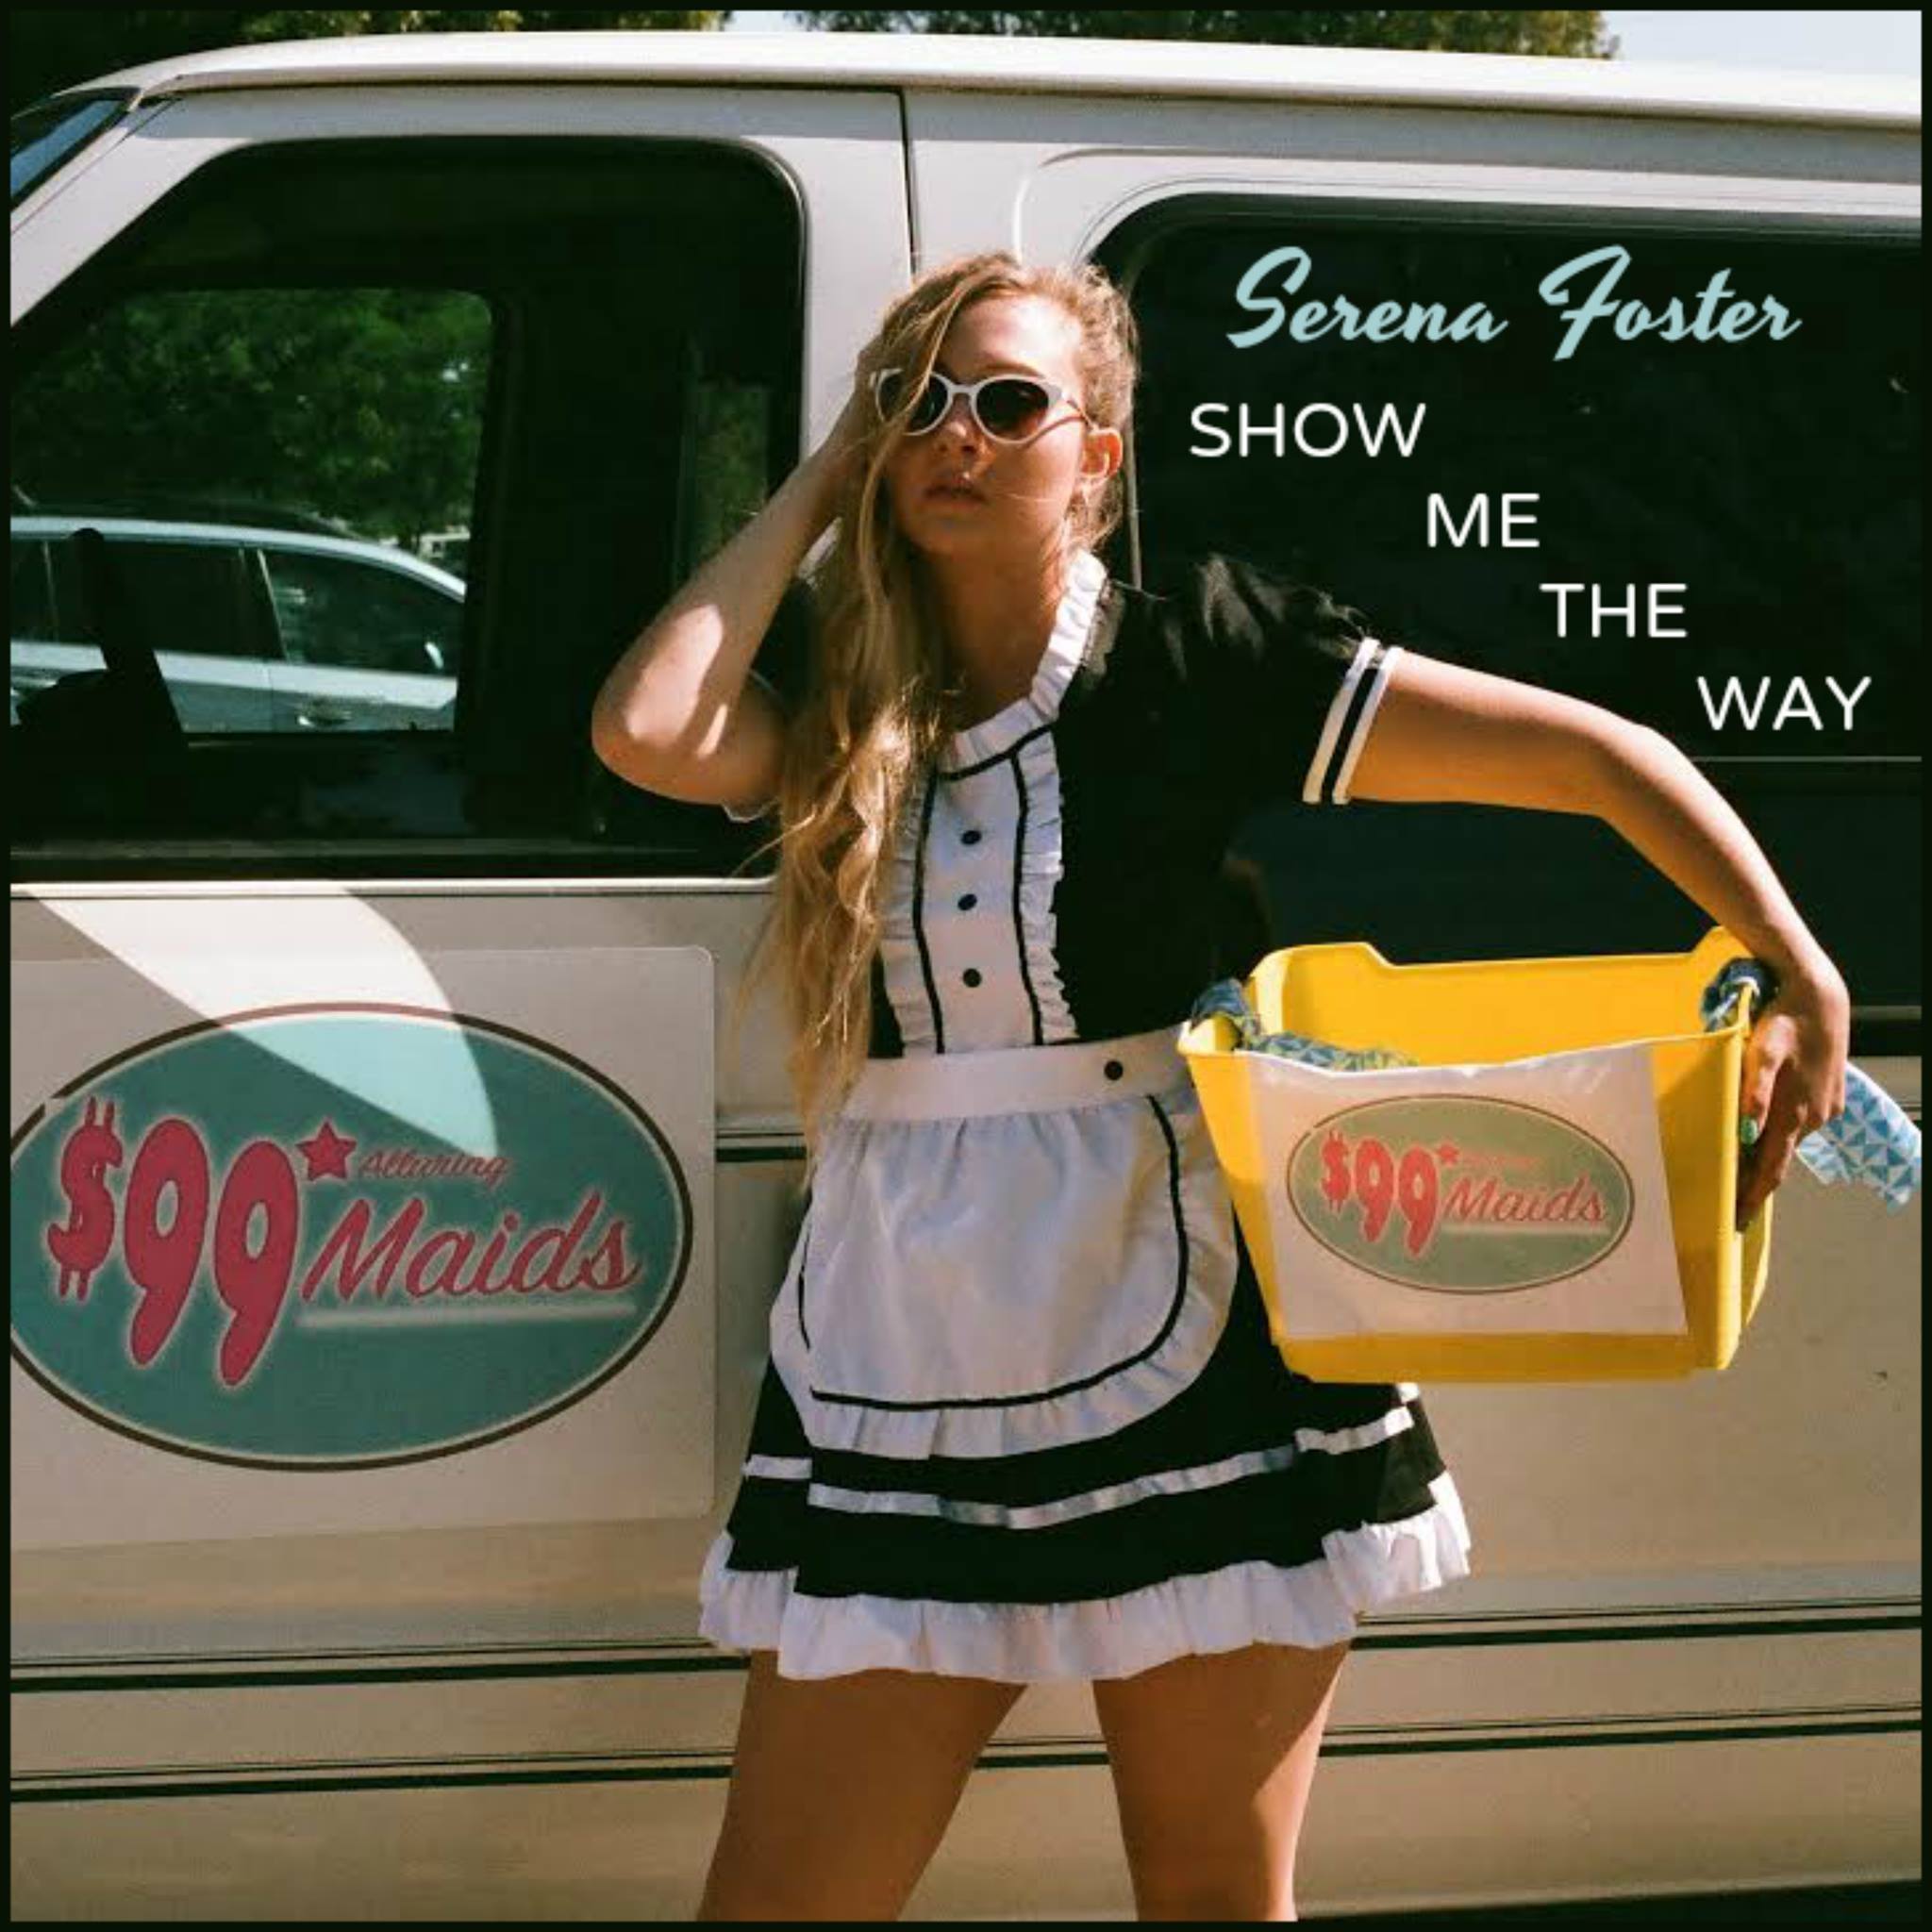 Serena Foster – “Show Me The Way”